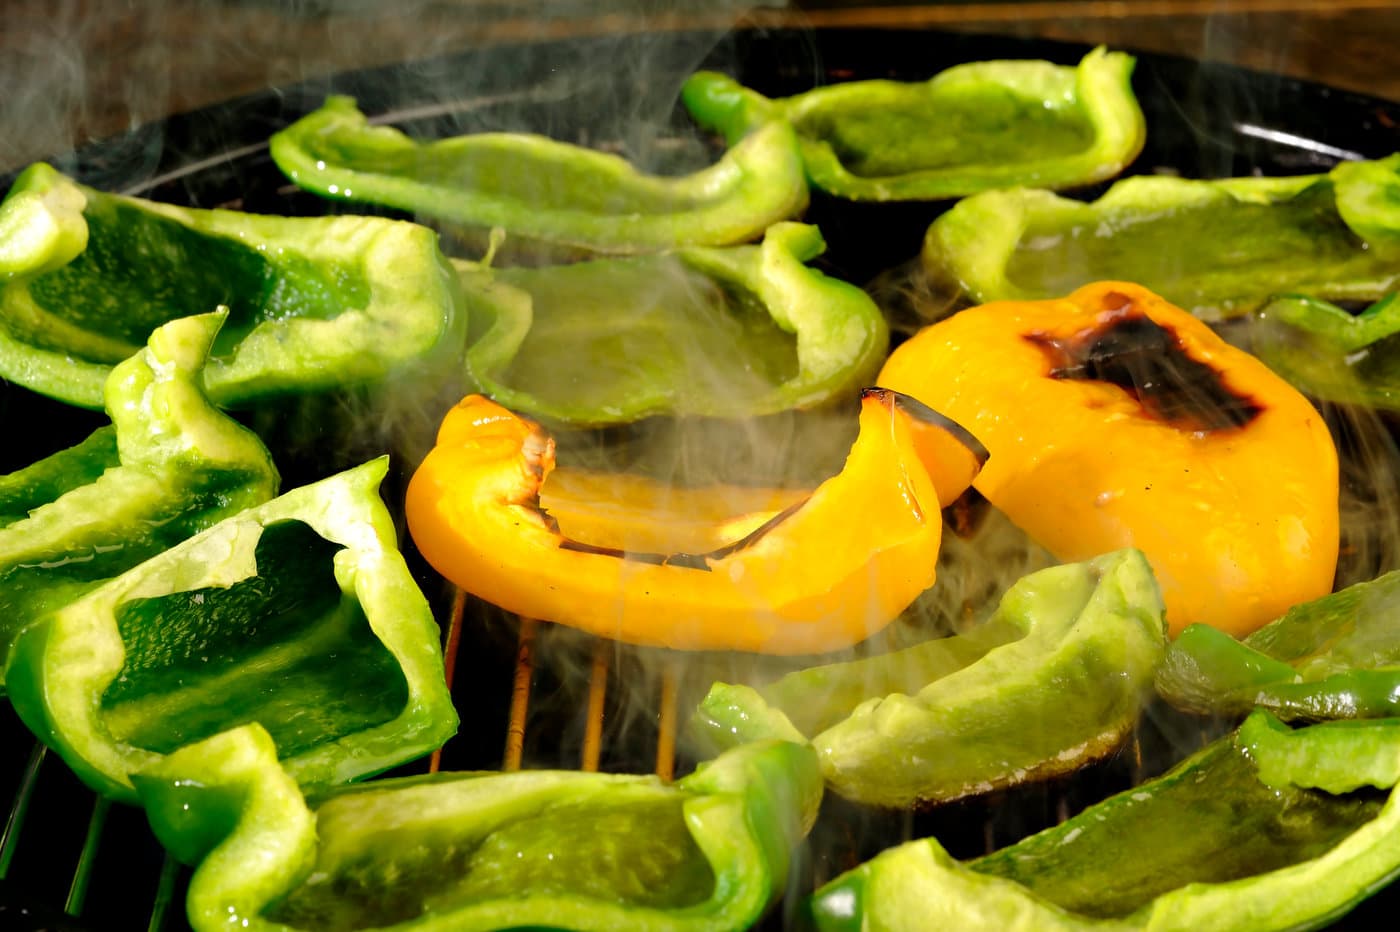 Roasting bell peppers on the BBQ grill